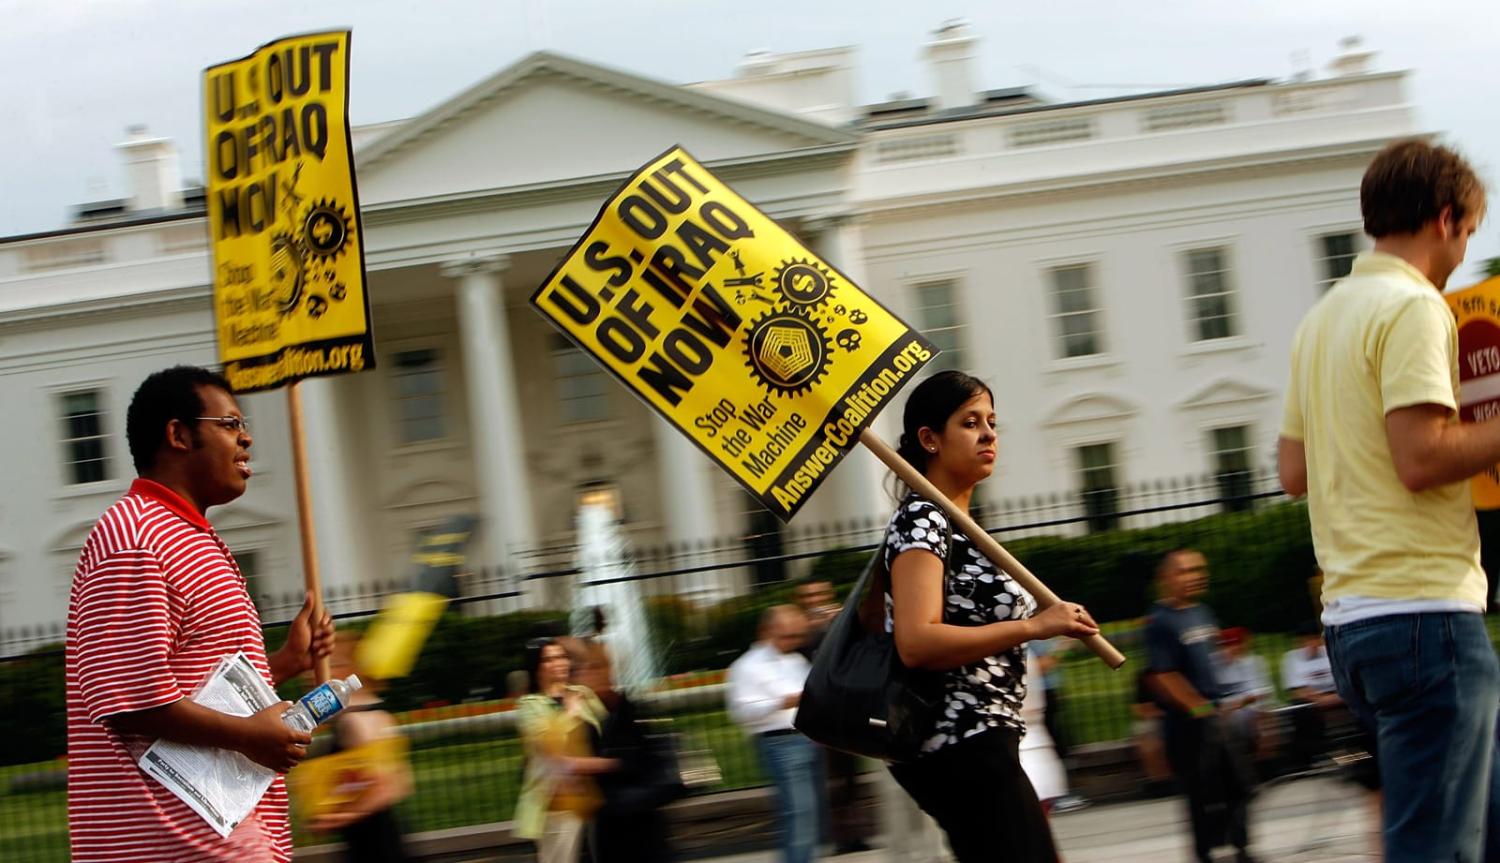 Anti-war protesters gather outside the White House in May, 2007 (Chip Somodevilla/Getty Images)